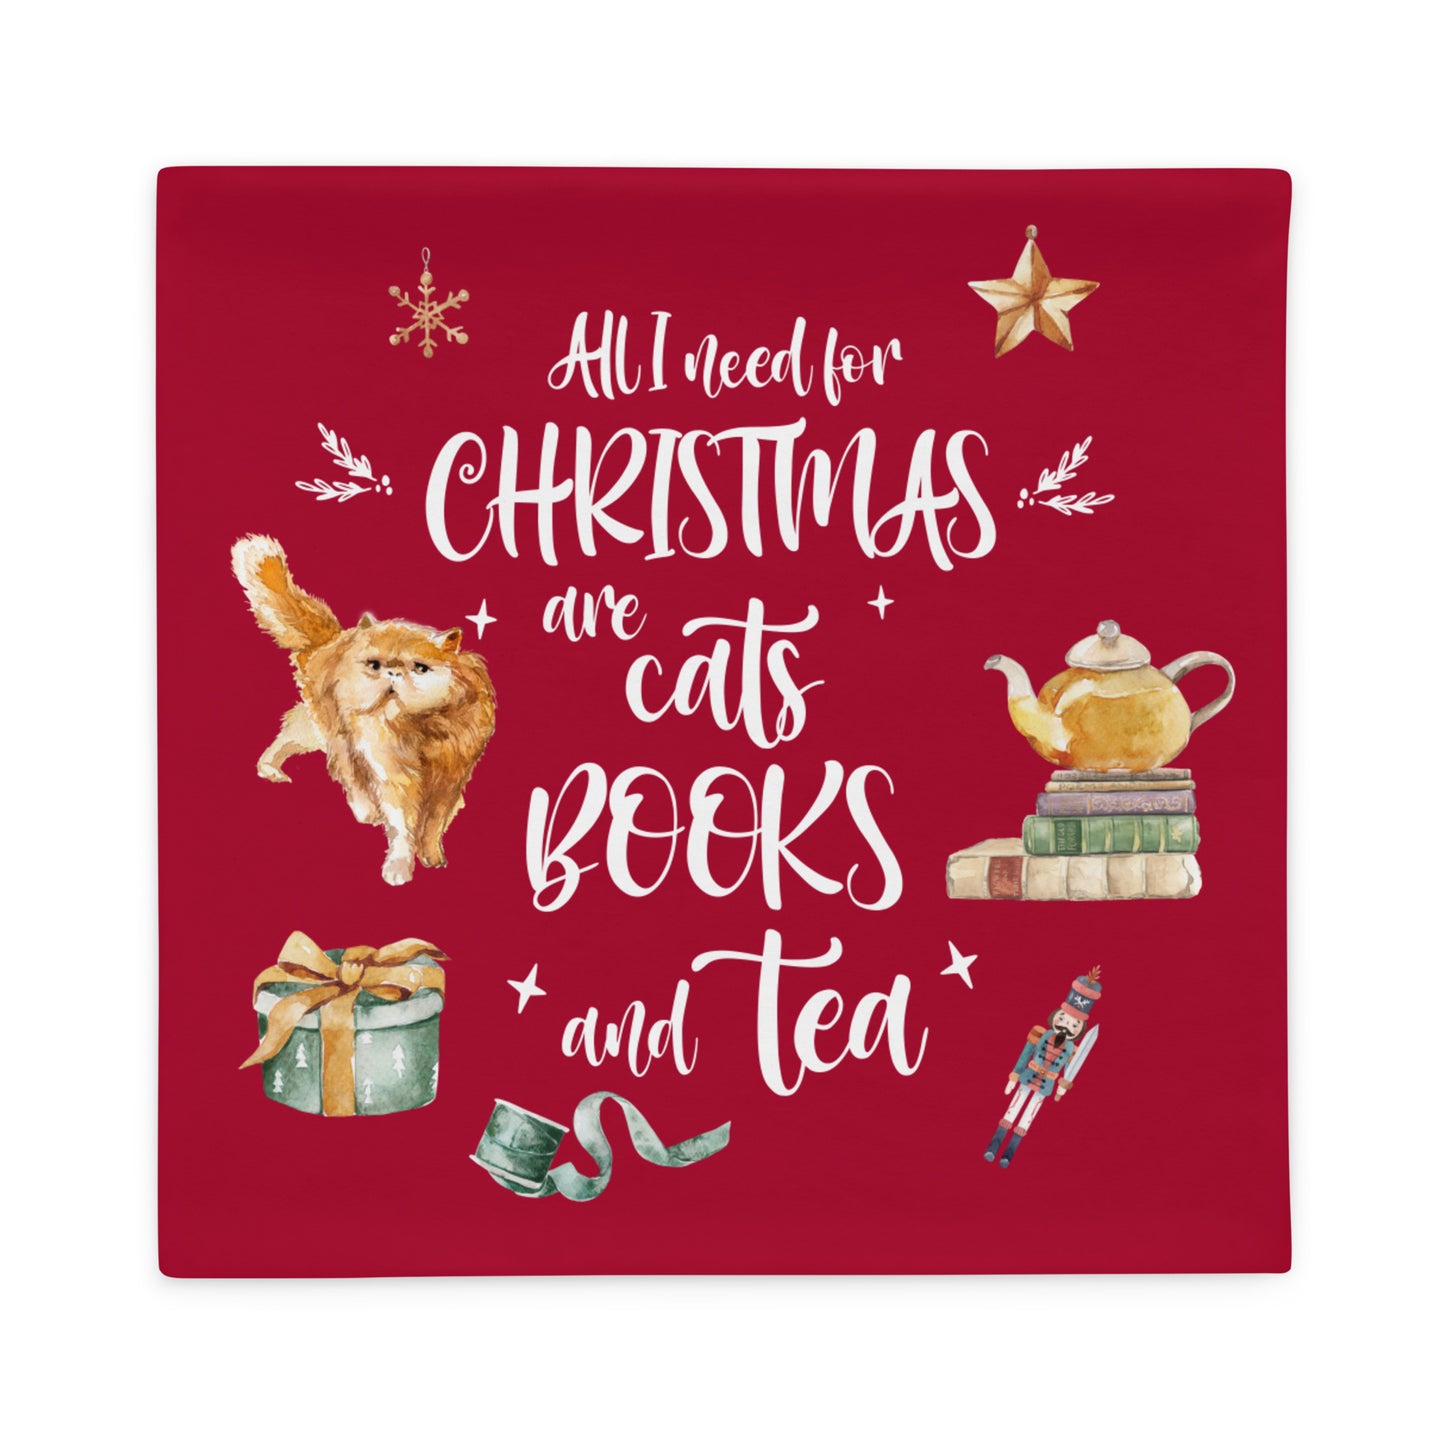 All I Need for Christmas are Cats Books and Tea Cute Bookish Pillow Case